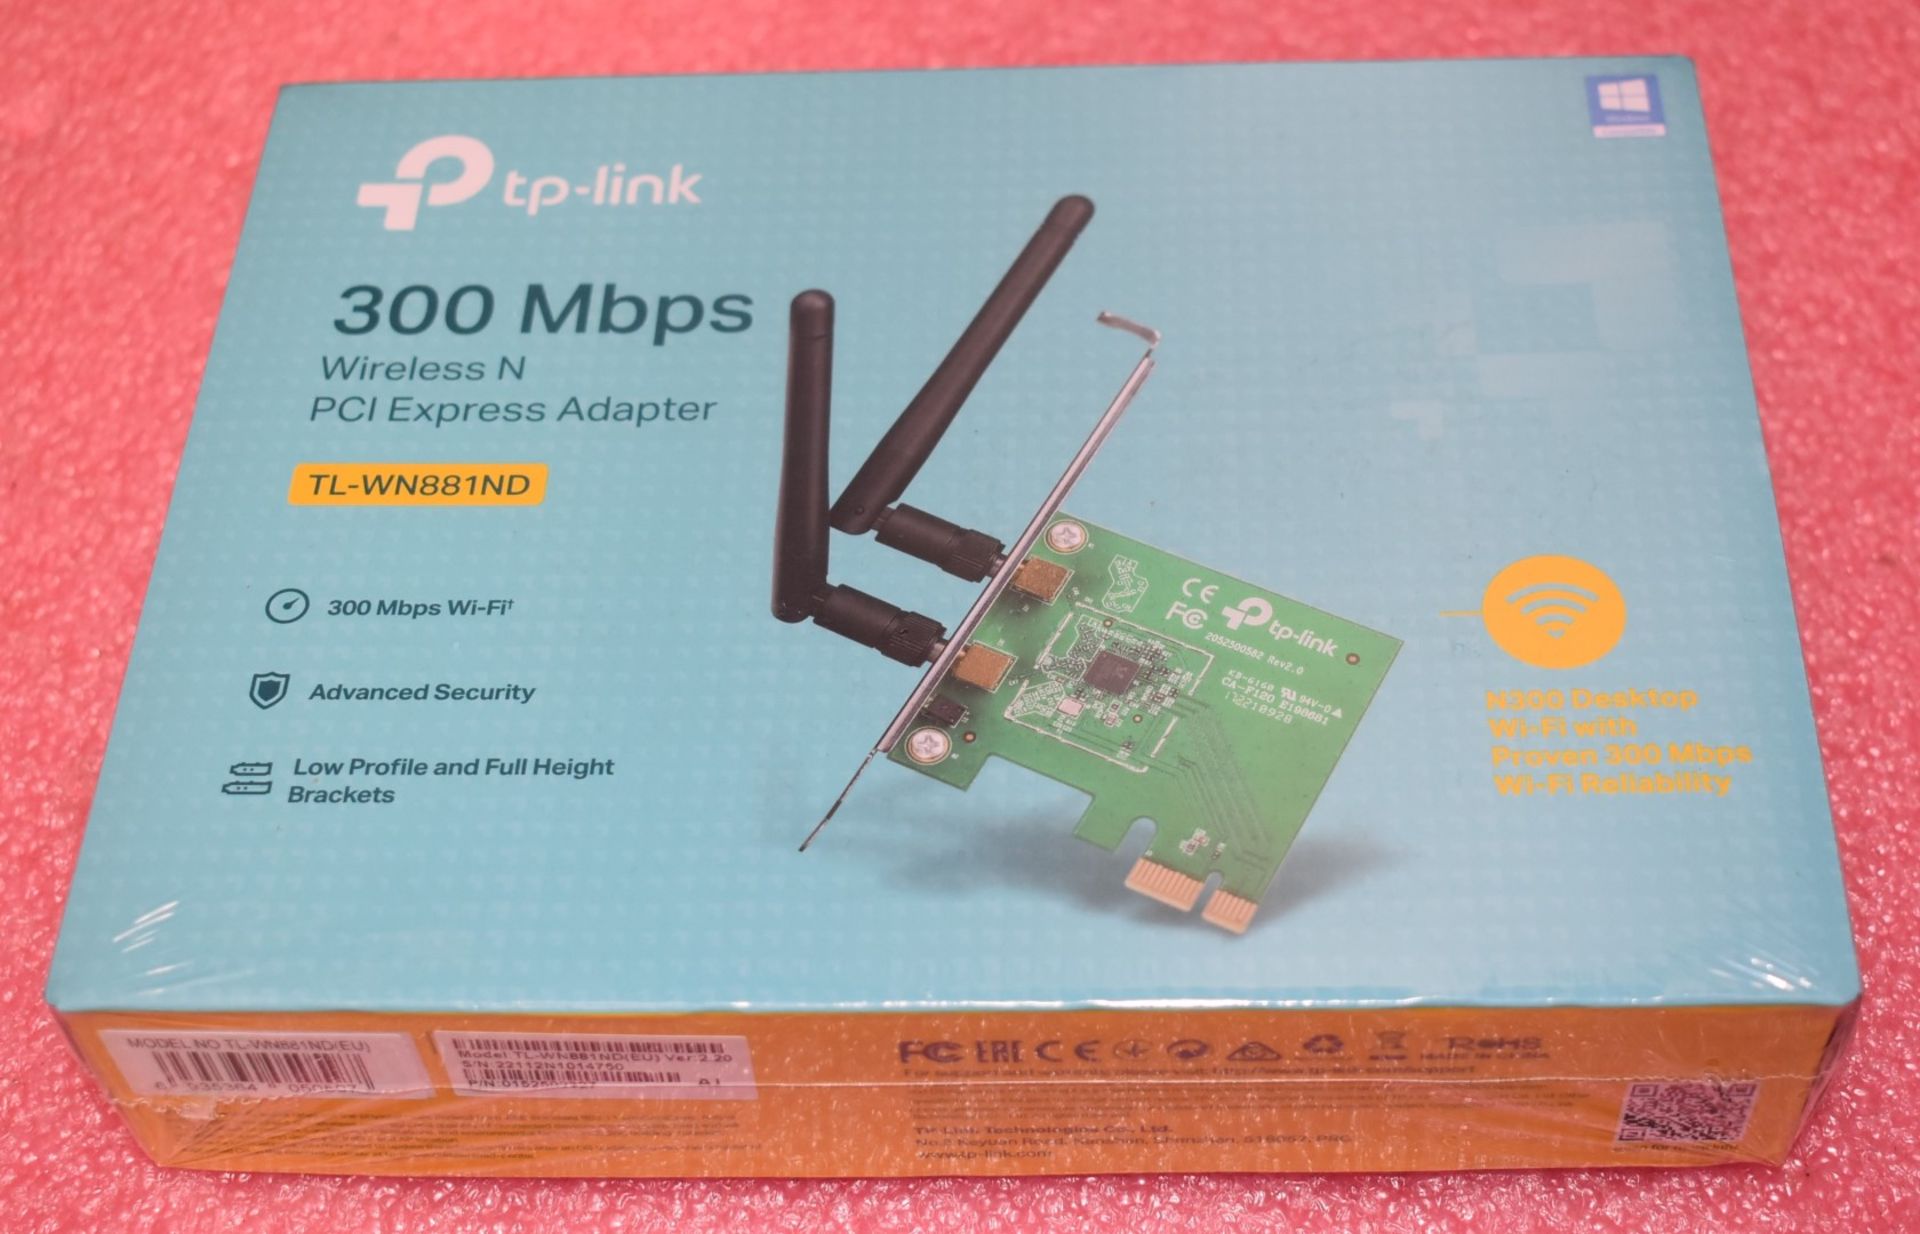 1 x TP Link 300Mbps Wireless N PCI Express Adapter - TL-WN881ND - New Sealed Stock - Image 4 of 4